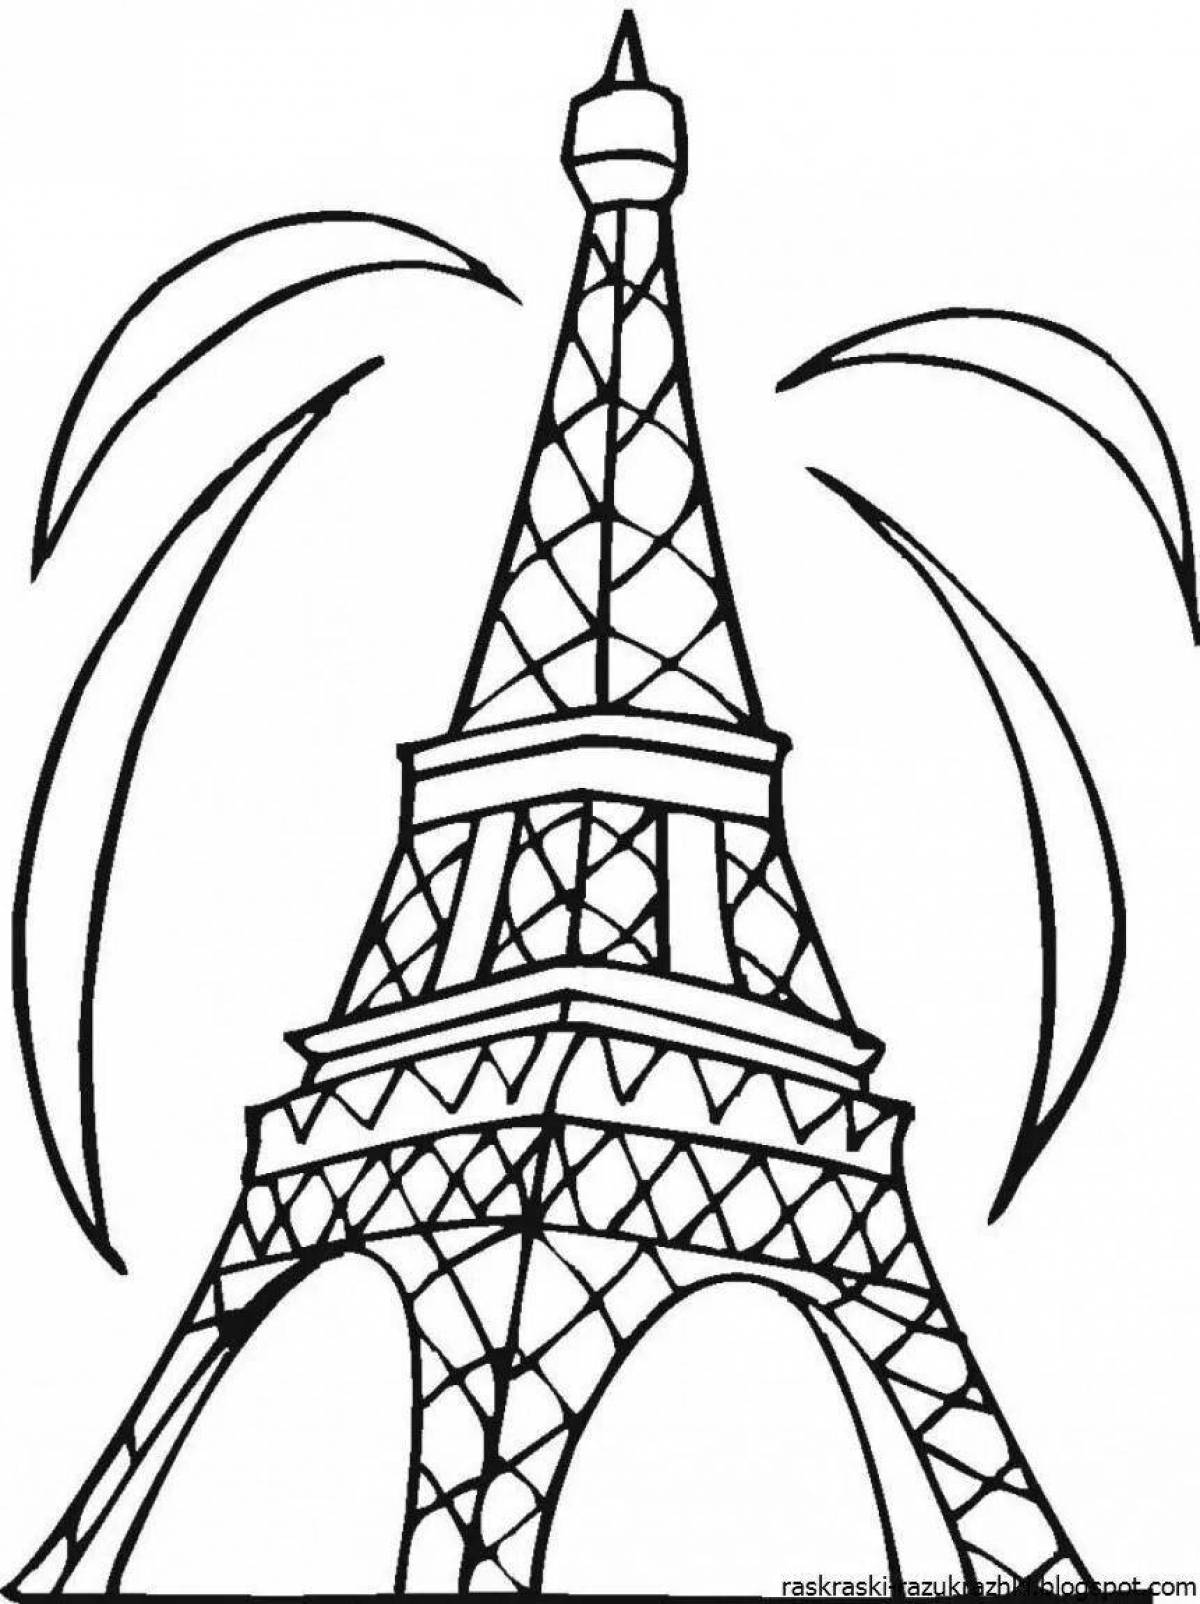 Amazing tower coloring page for kids